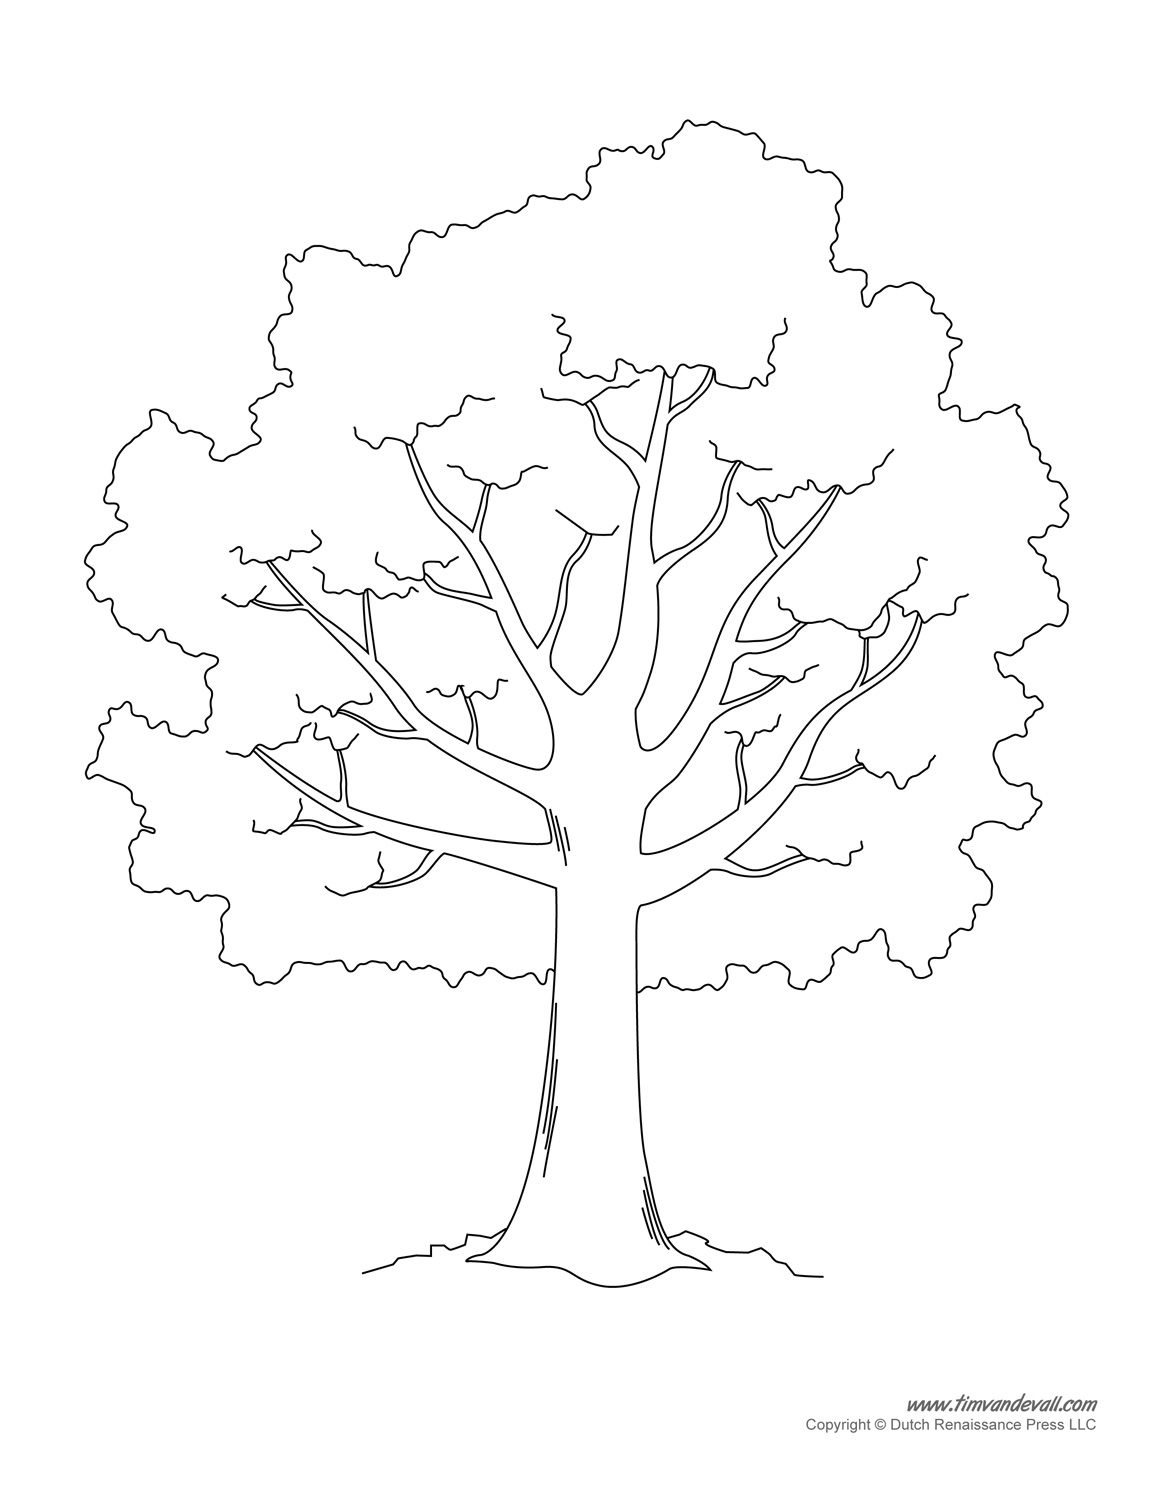 Leafless Tree Template images